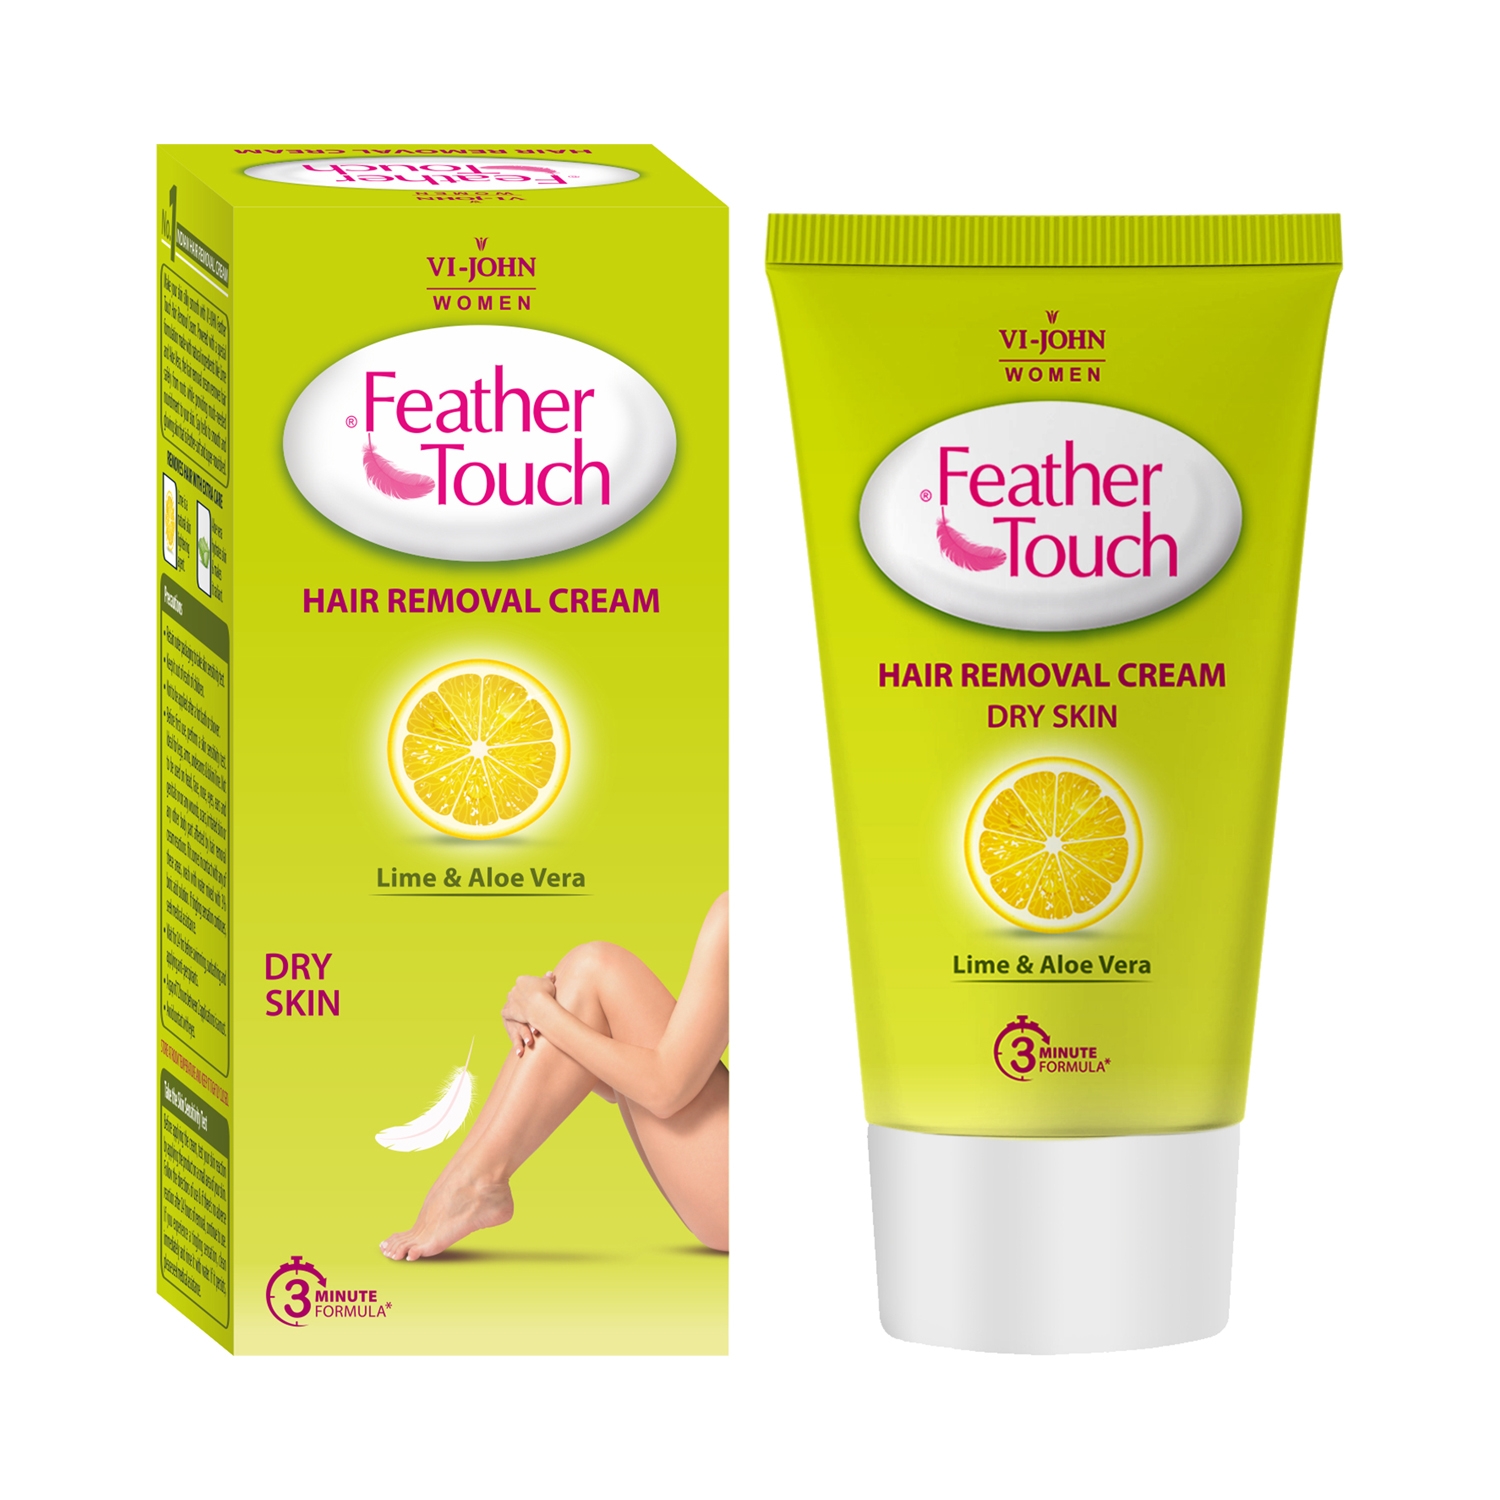 VI-JOHN | VI-JOHN Feather Touch Hair Removal Cream With Lime & Aloe Vera Tube For Dry Skin (40g)